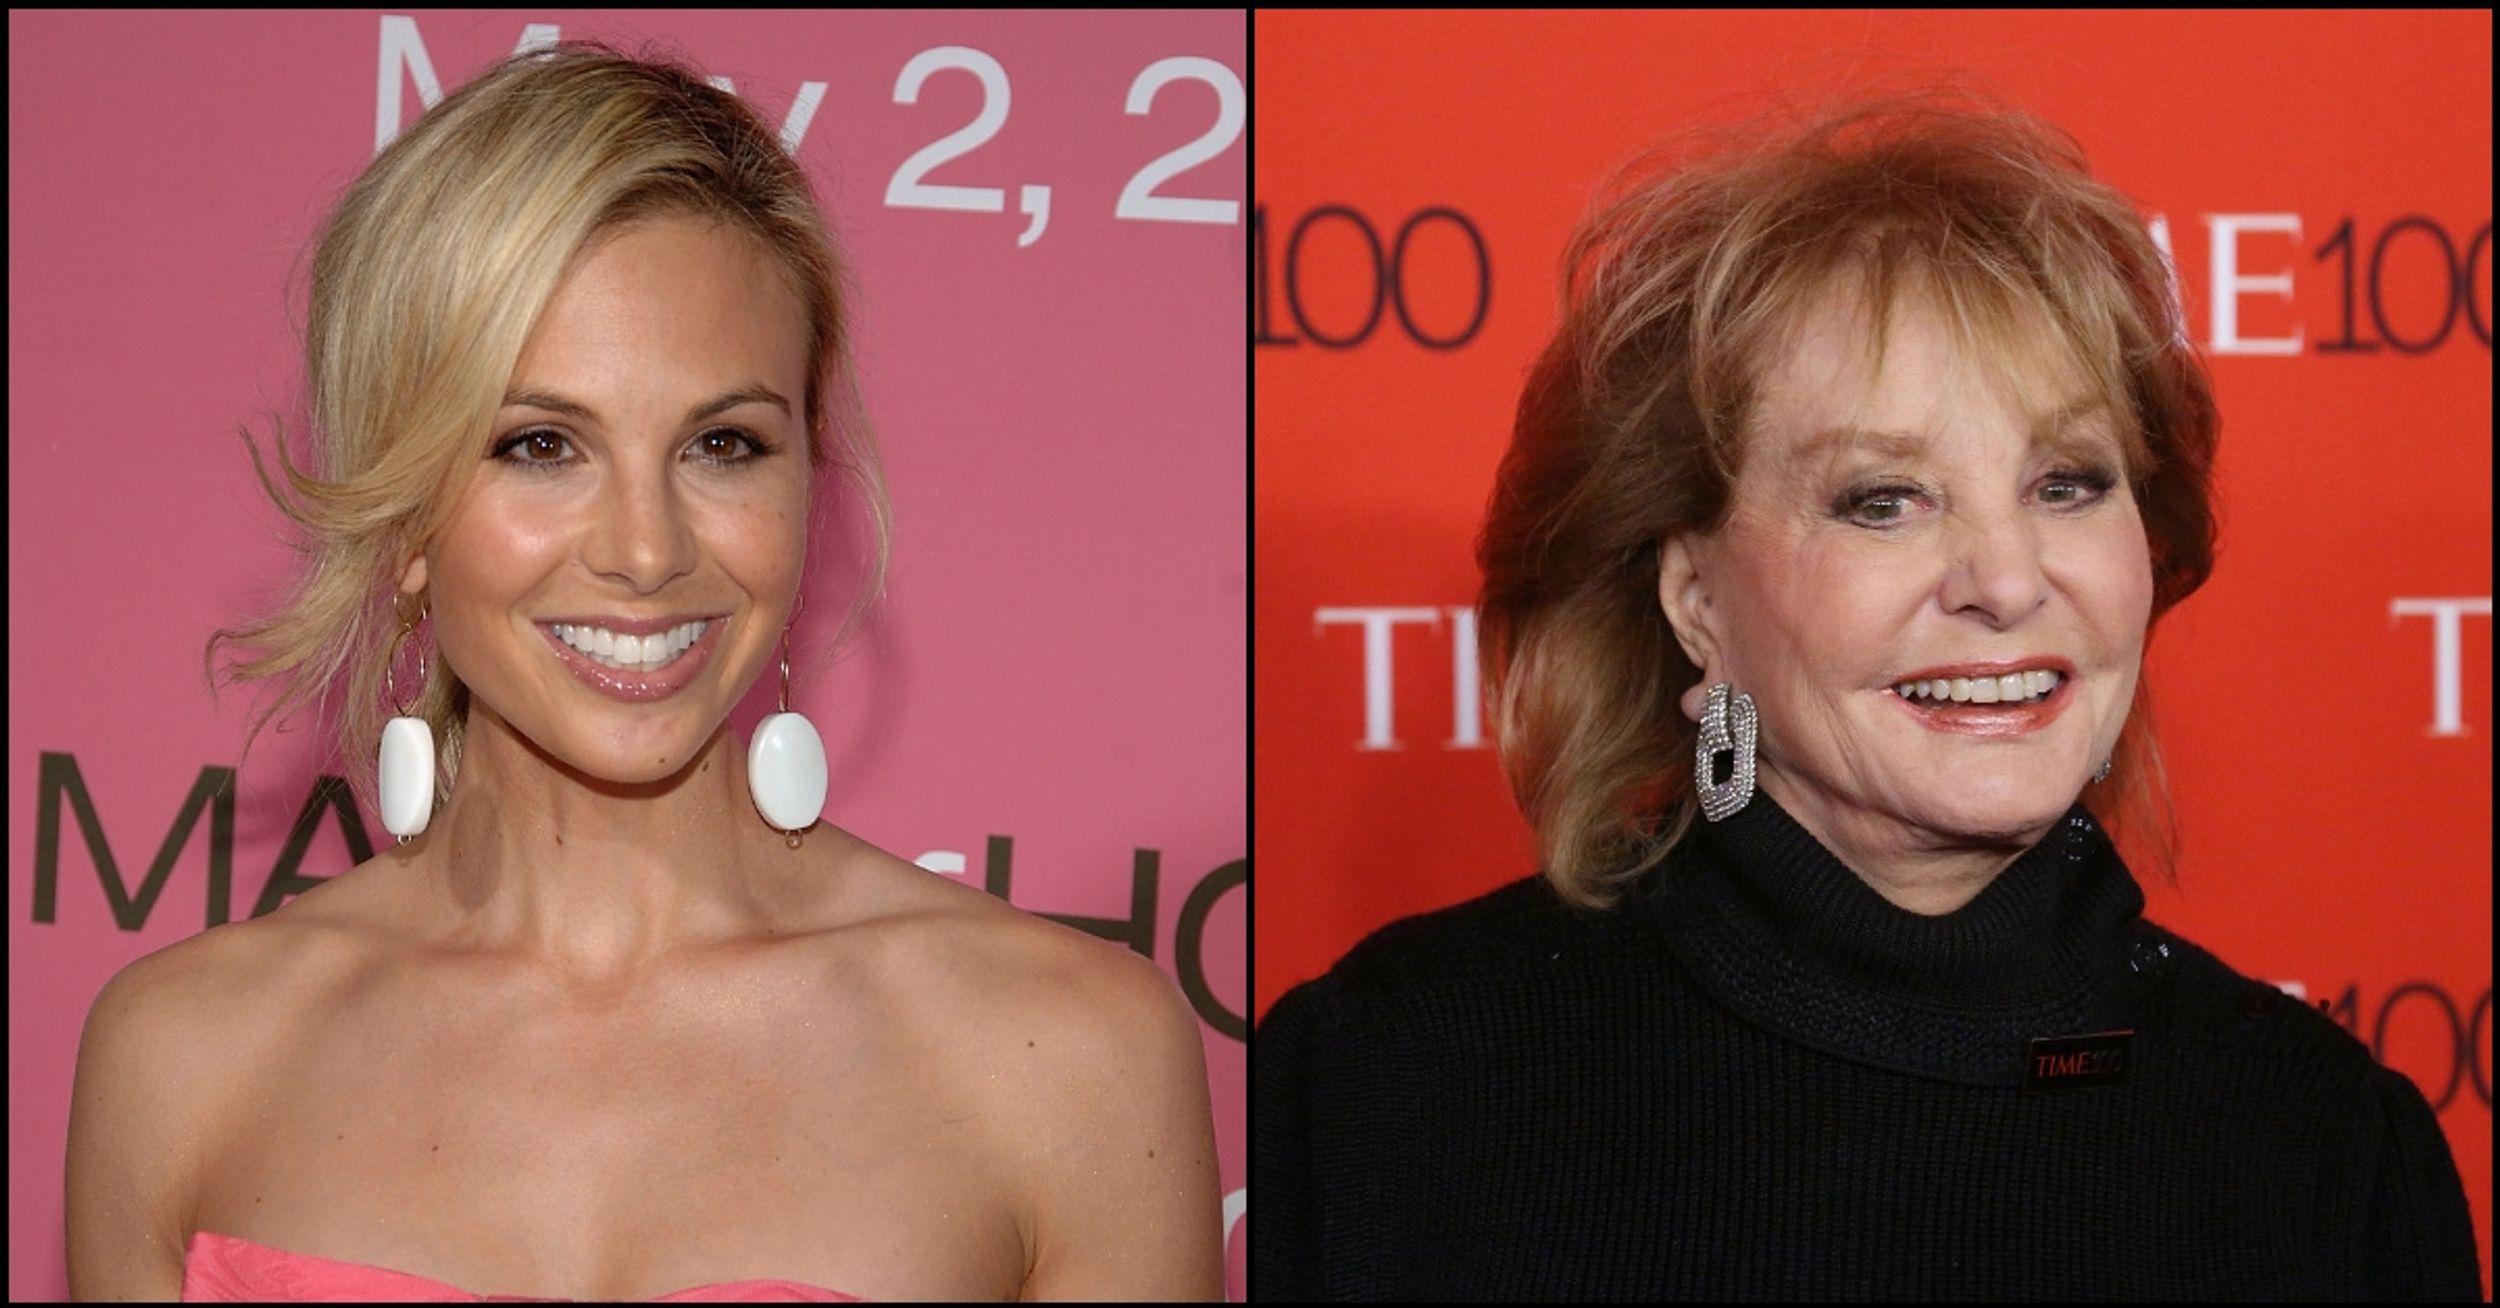 Elisabeth Hasselbeck Issues Statement After Audio Of Her Meltdown During A Fight With Barbara Walters Surfaces